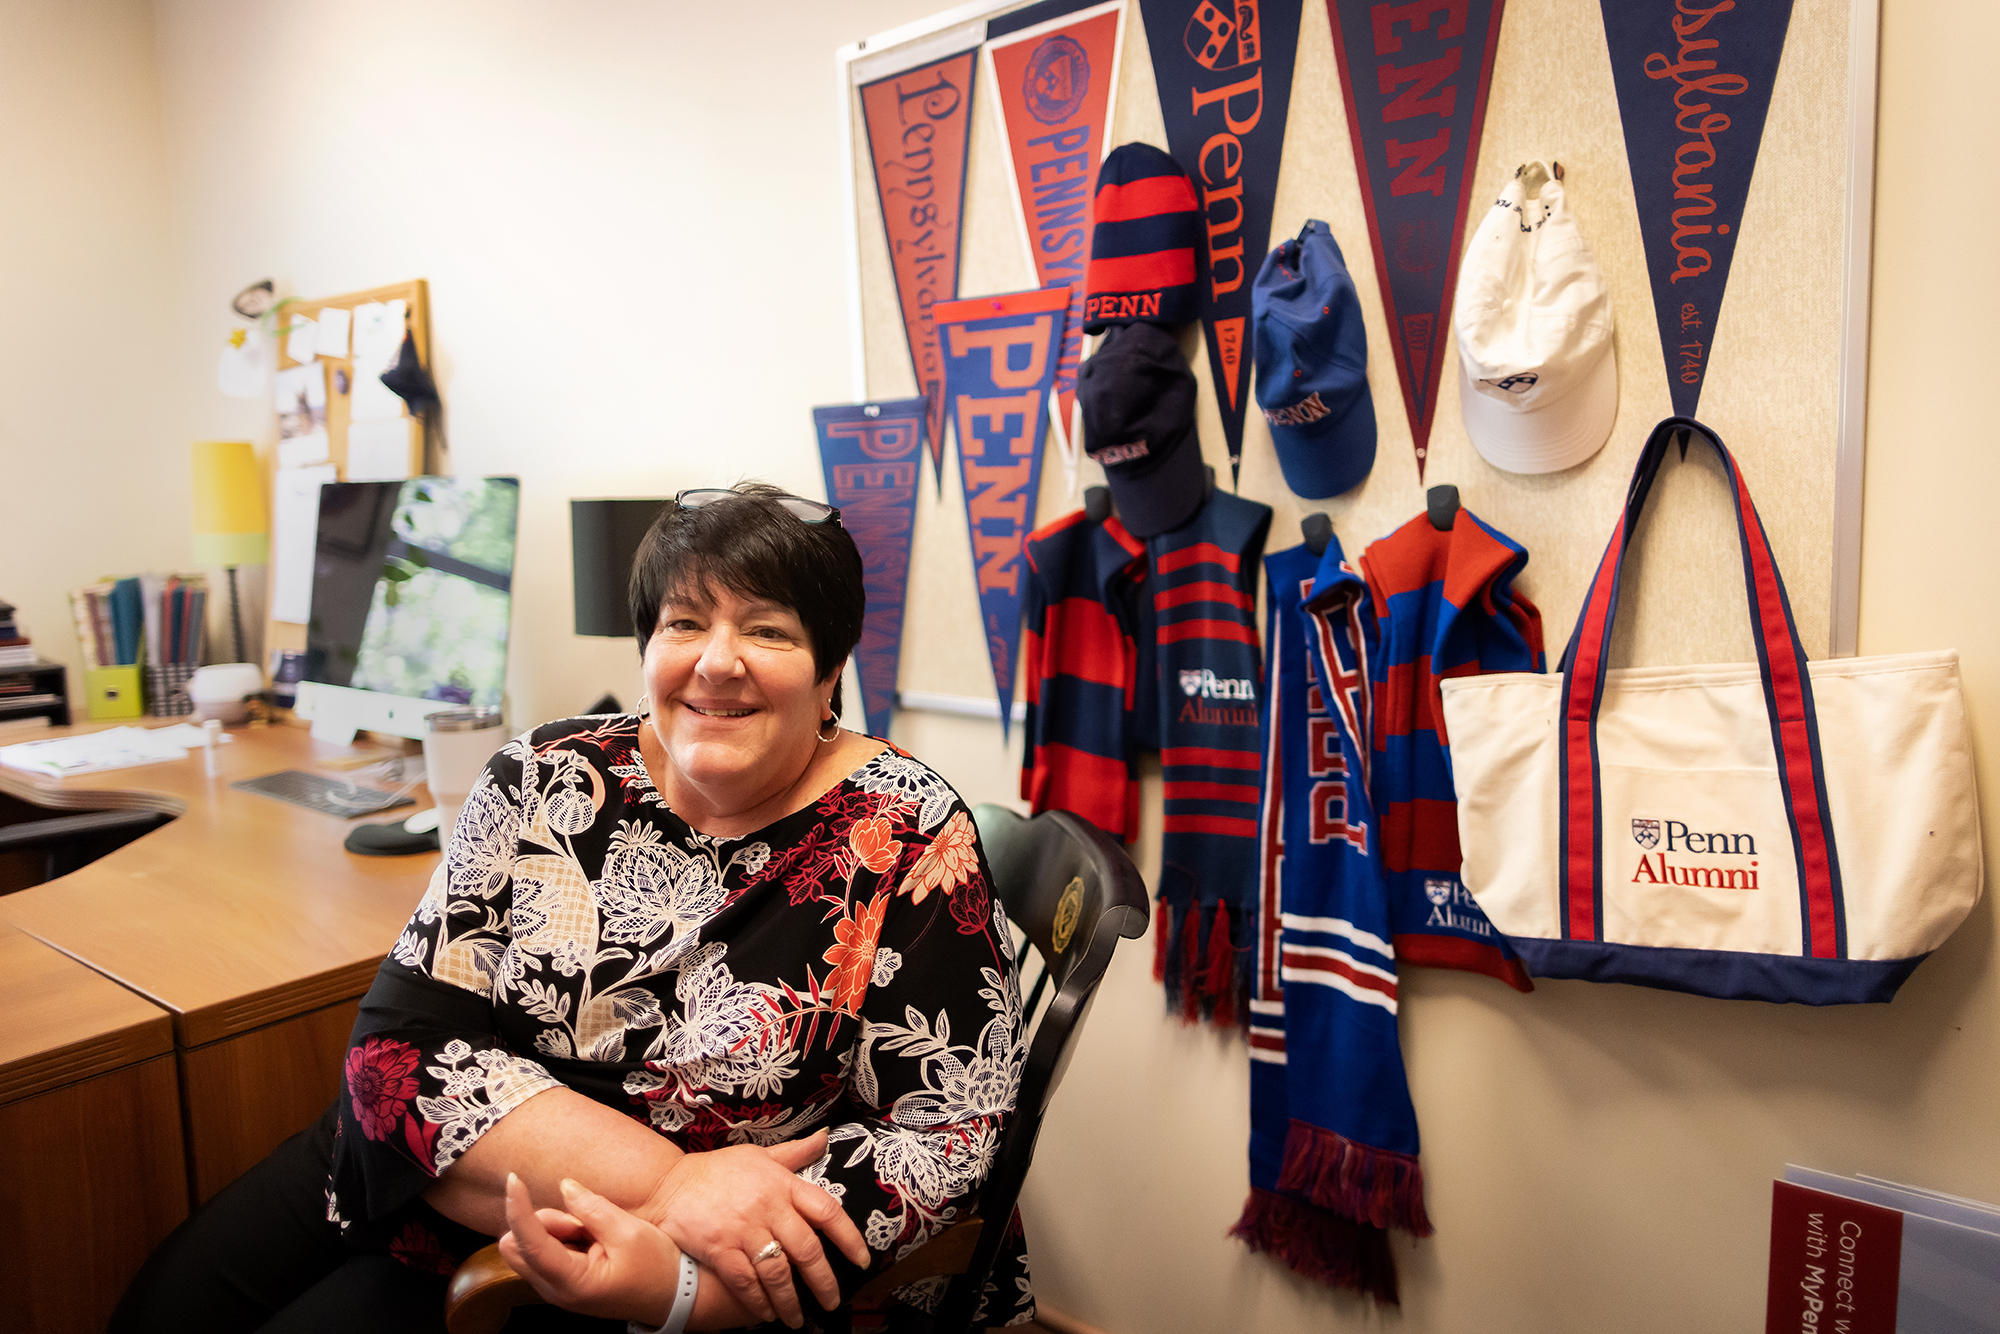 Kristina Clark sitting at a desk with Penn pennants, hats, flags, and bag behind her